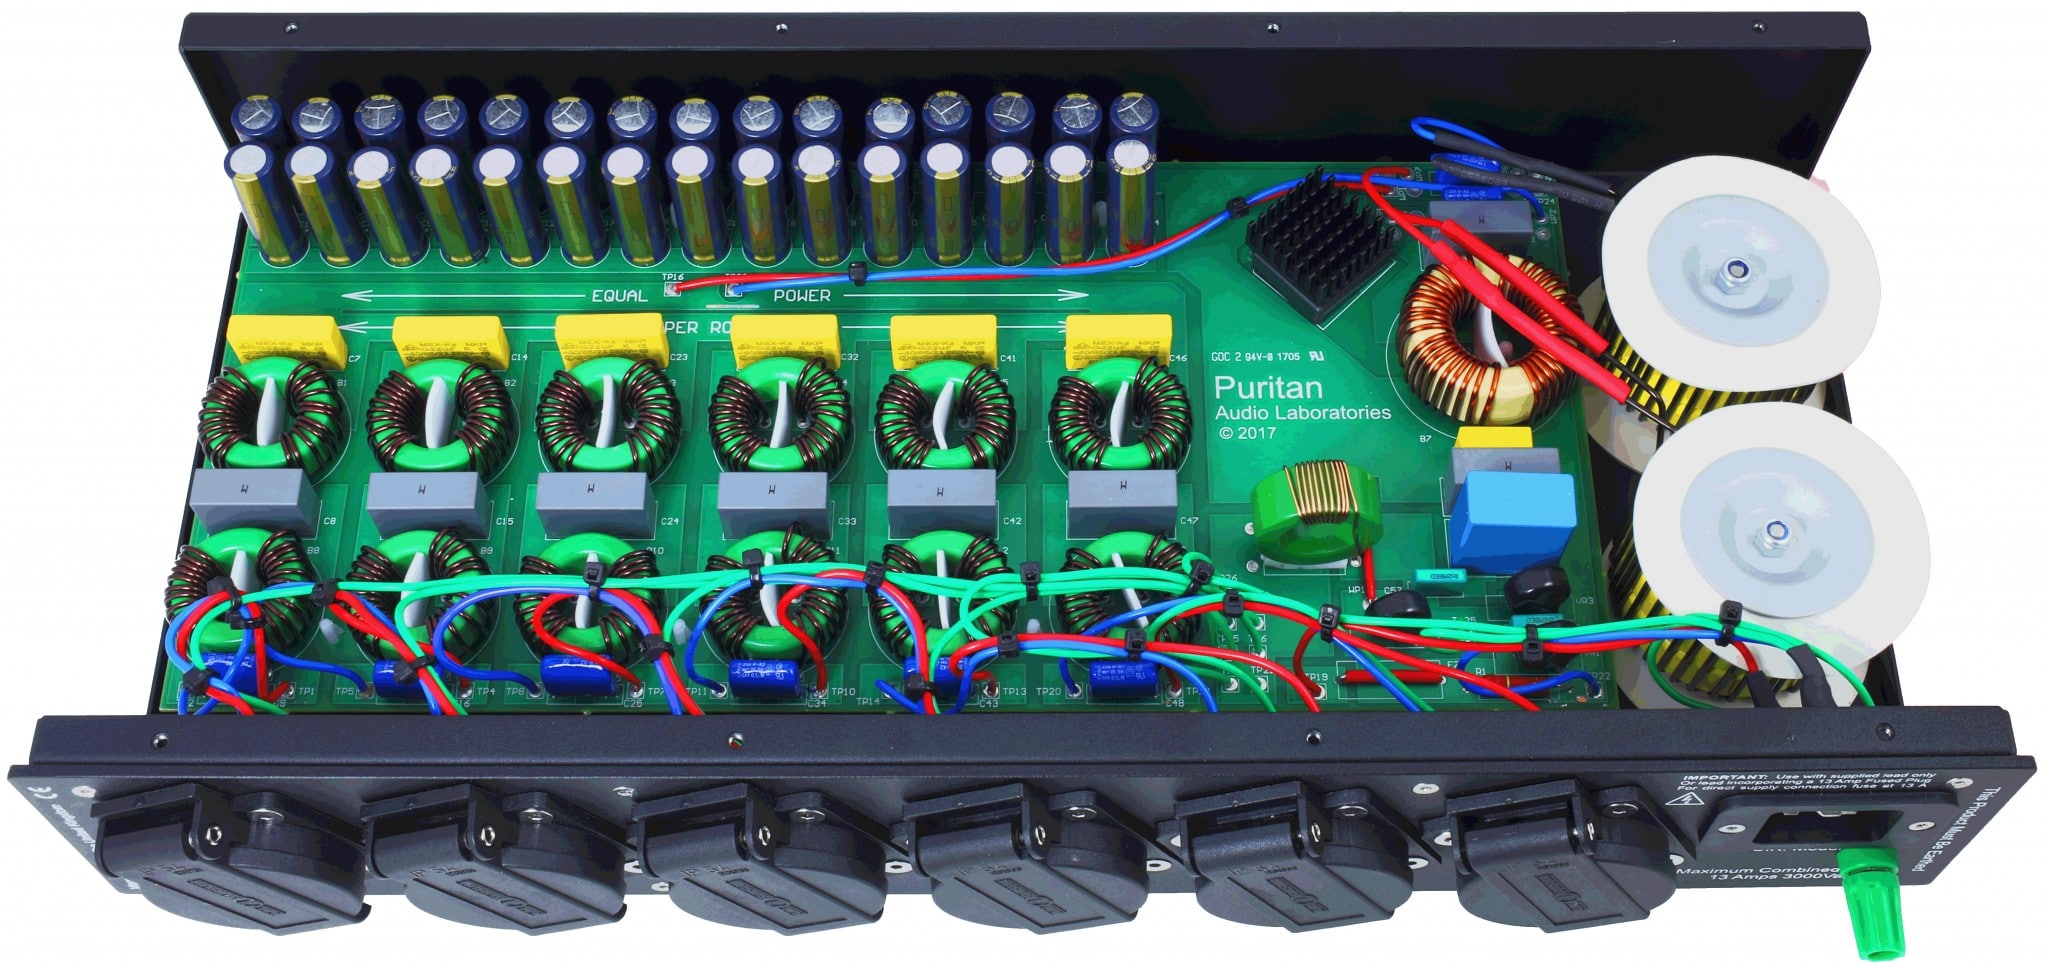 Puritan PSM156 Power Conditioner (available to demo)